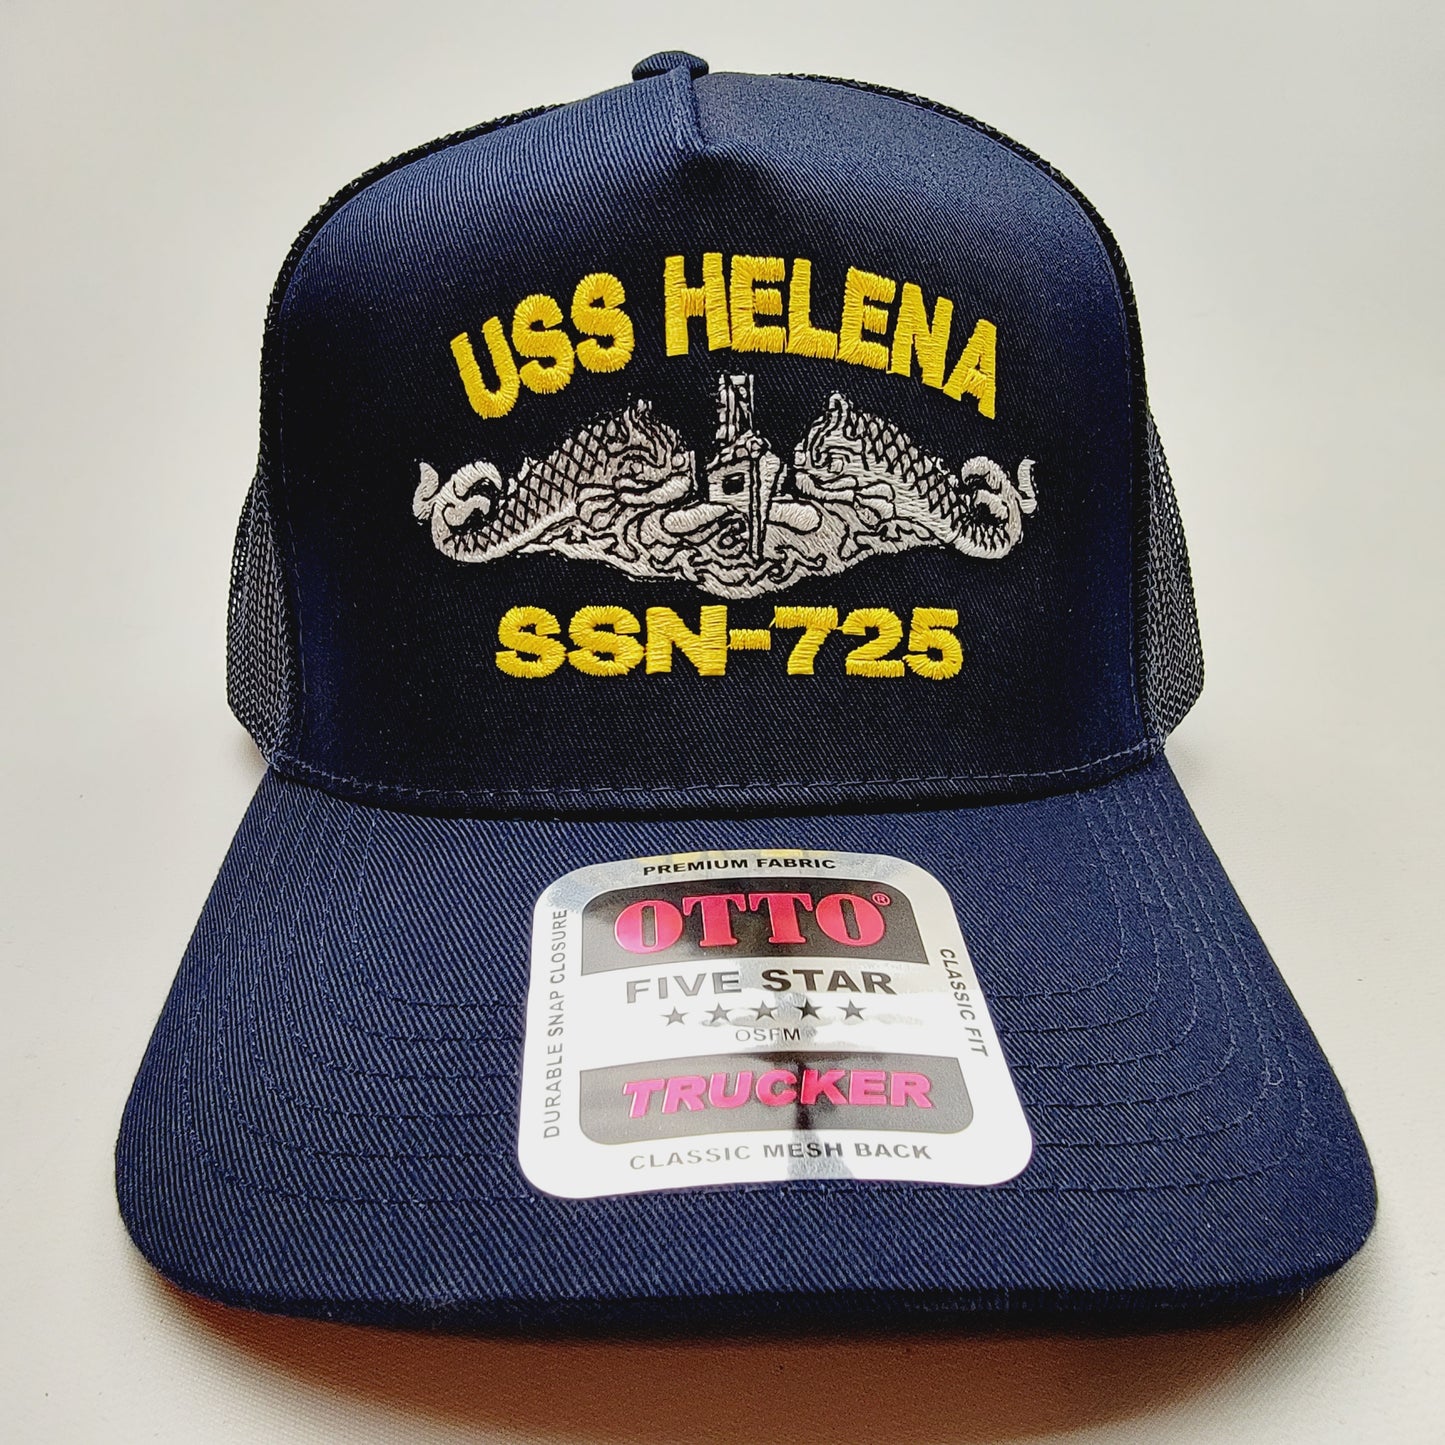 US NAVY USS HELENA SSN-725 Embroidered Hat Baseball Cap Adjustable Blue